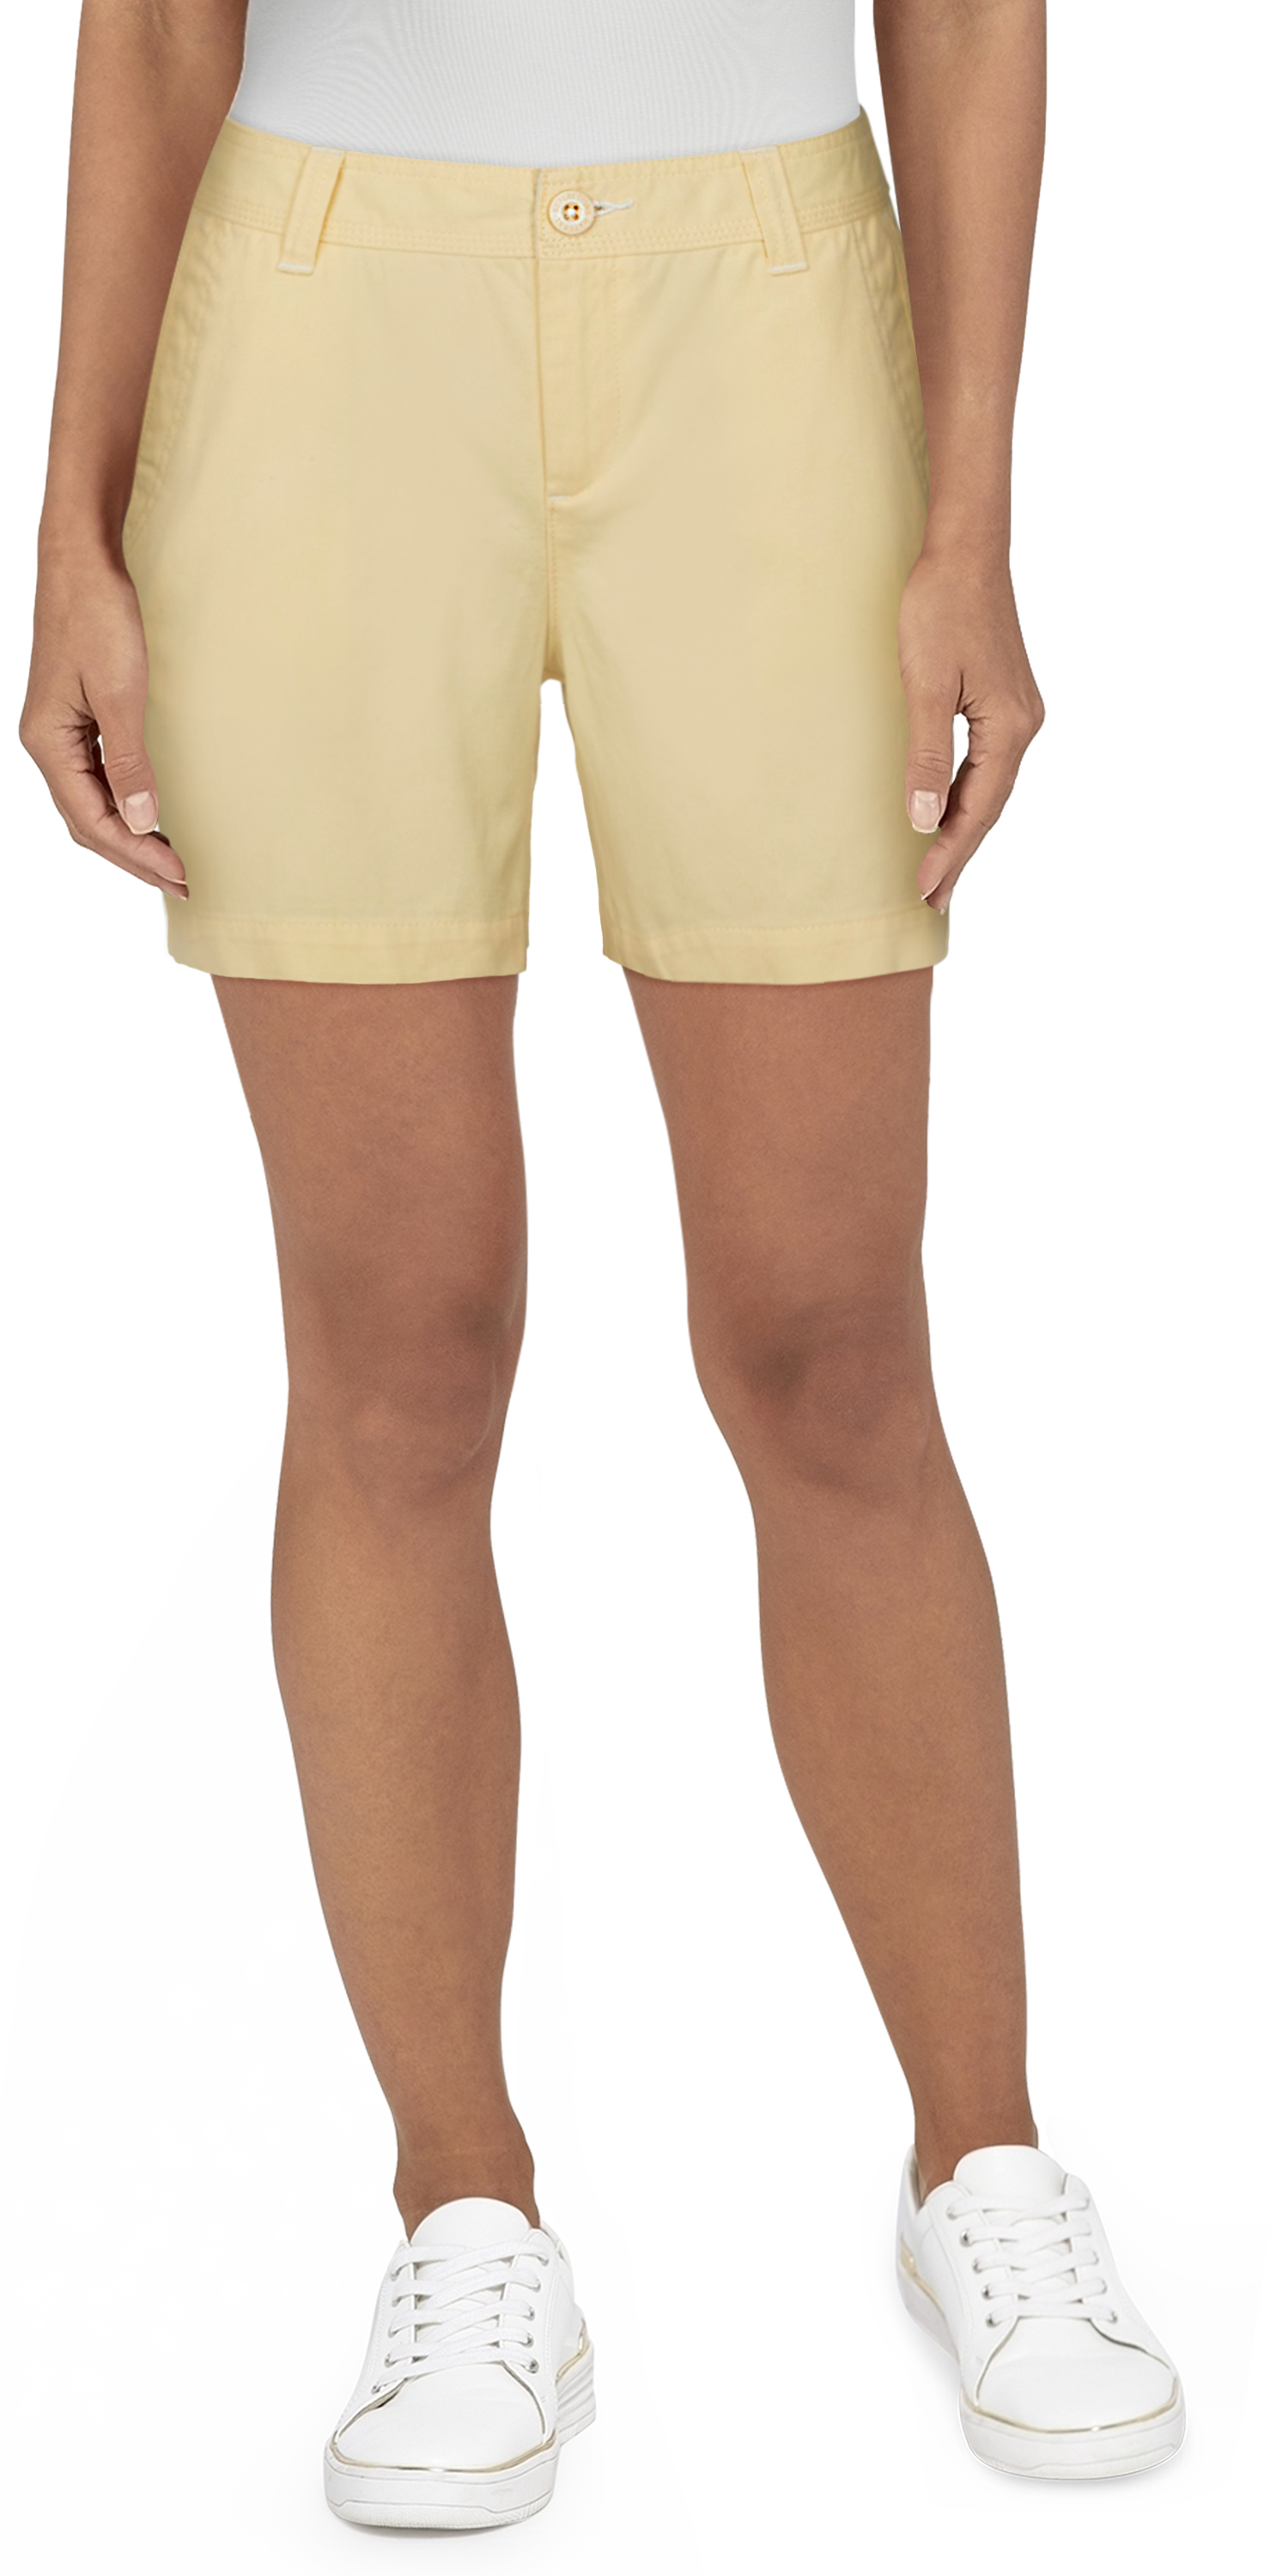 Natural Reflections Spring Valley Shorts for Ladies - White Pepper-22 - 18